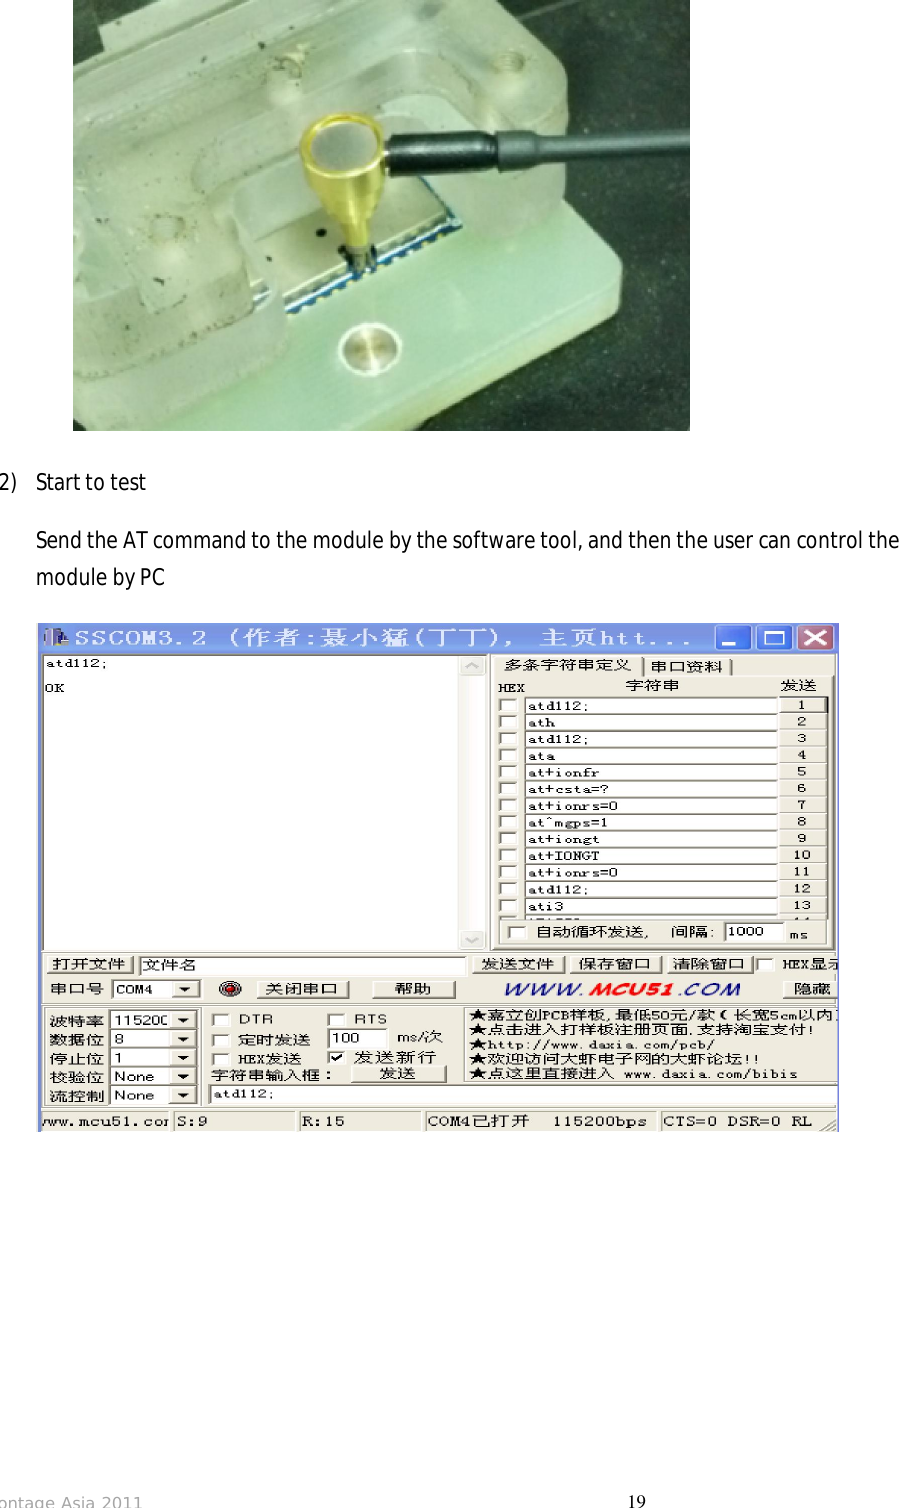                         © Montage Asia 2011                                       19  2) Start to test Send the AT command to the module by the software tool, and then the user can control the module by PC  